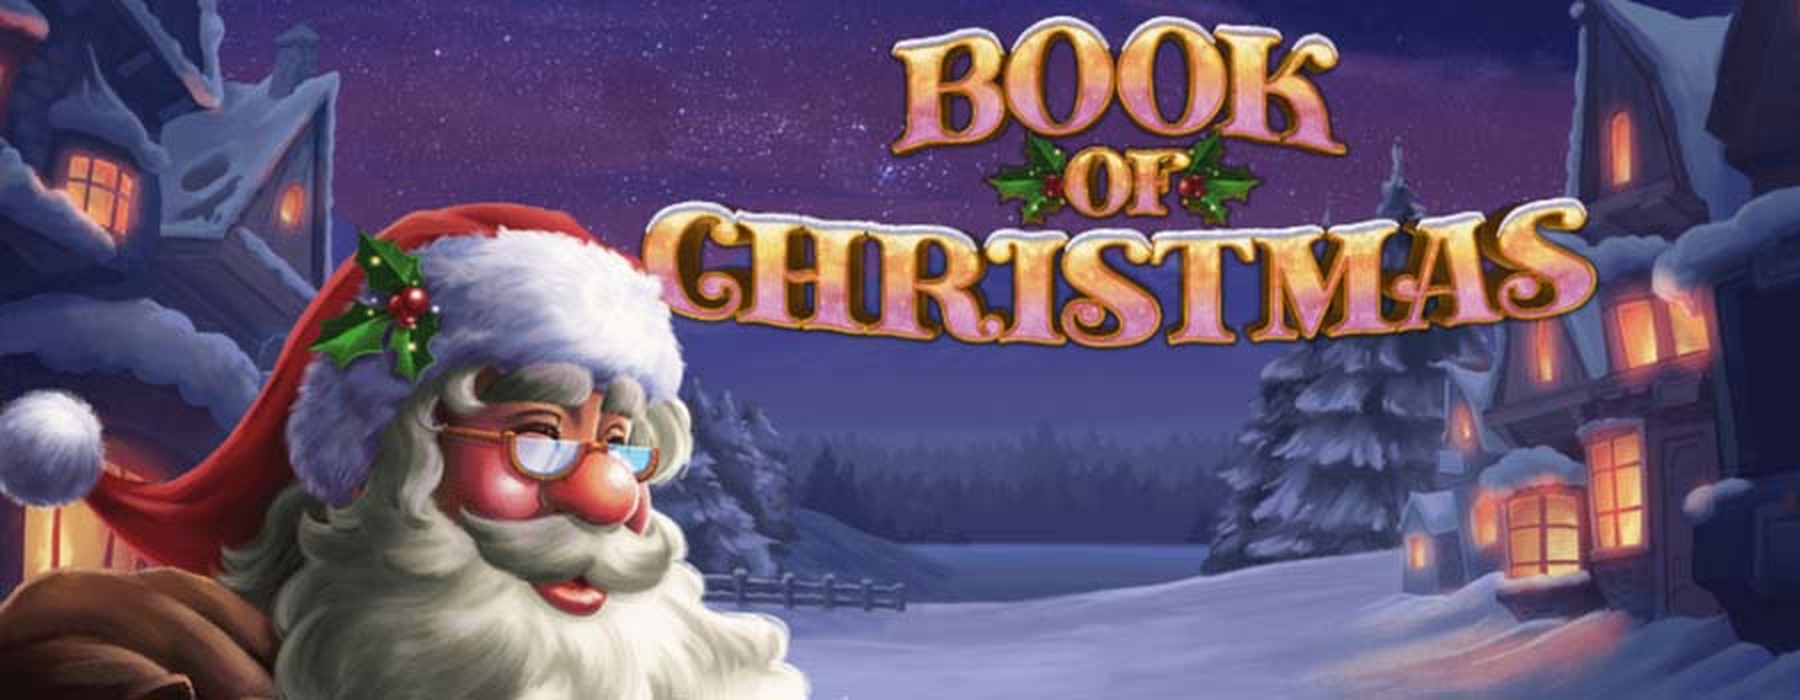 The Book of Christmas Online Slot Demo Game by Inspired Gaming